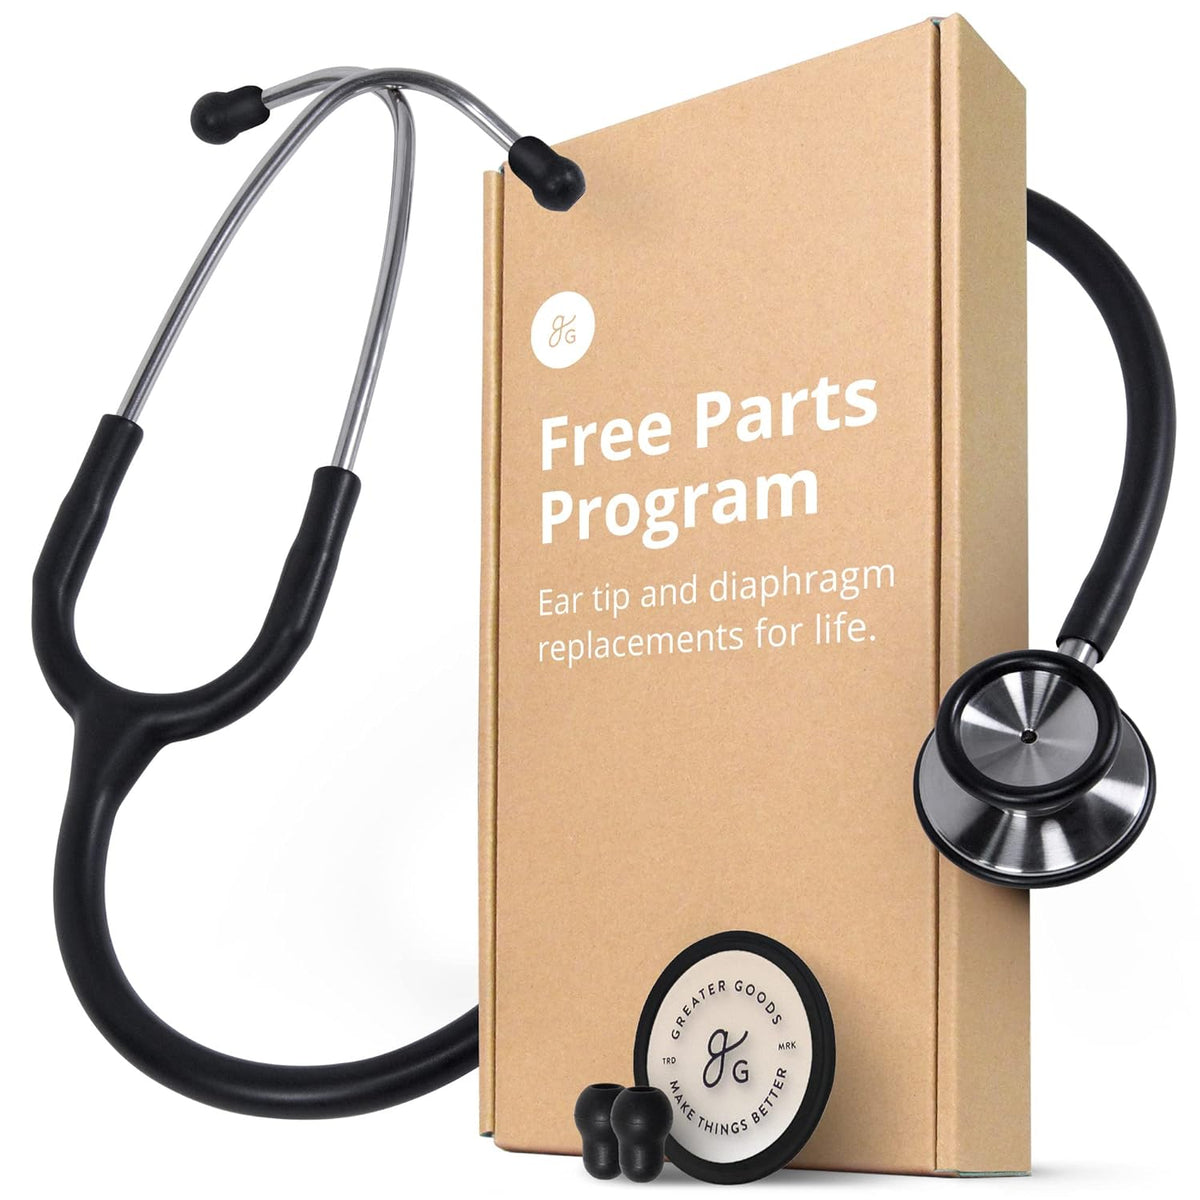 Greater Goods Premium Stethoscope and All-in-One Sphygmomanometer Bundle